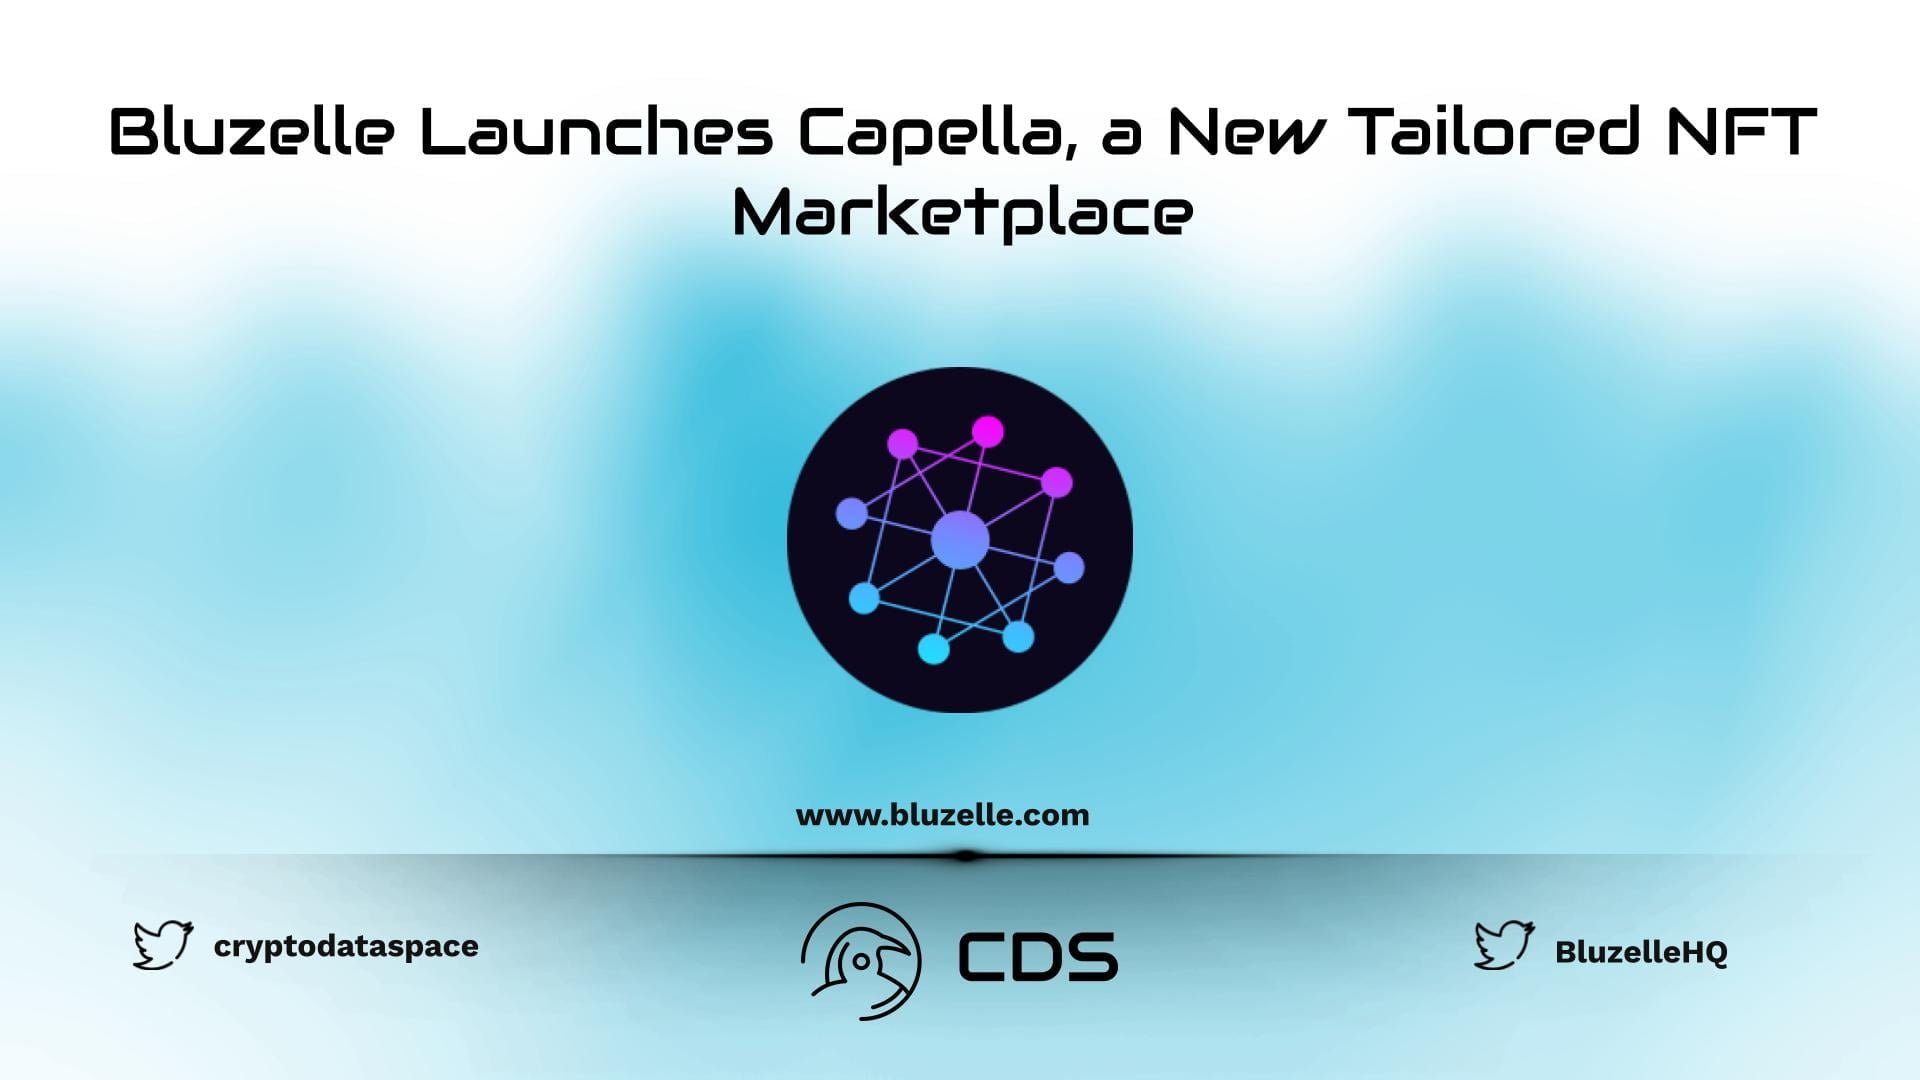 Bluzelle Launches Capella, a New Tailored NFT Marketplace